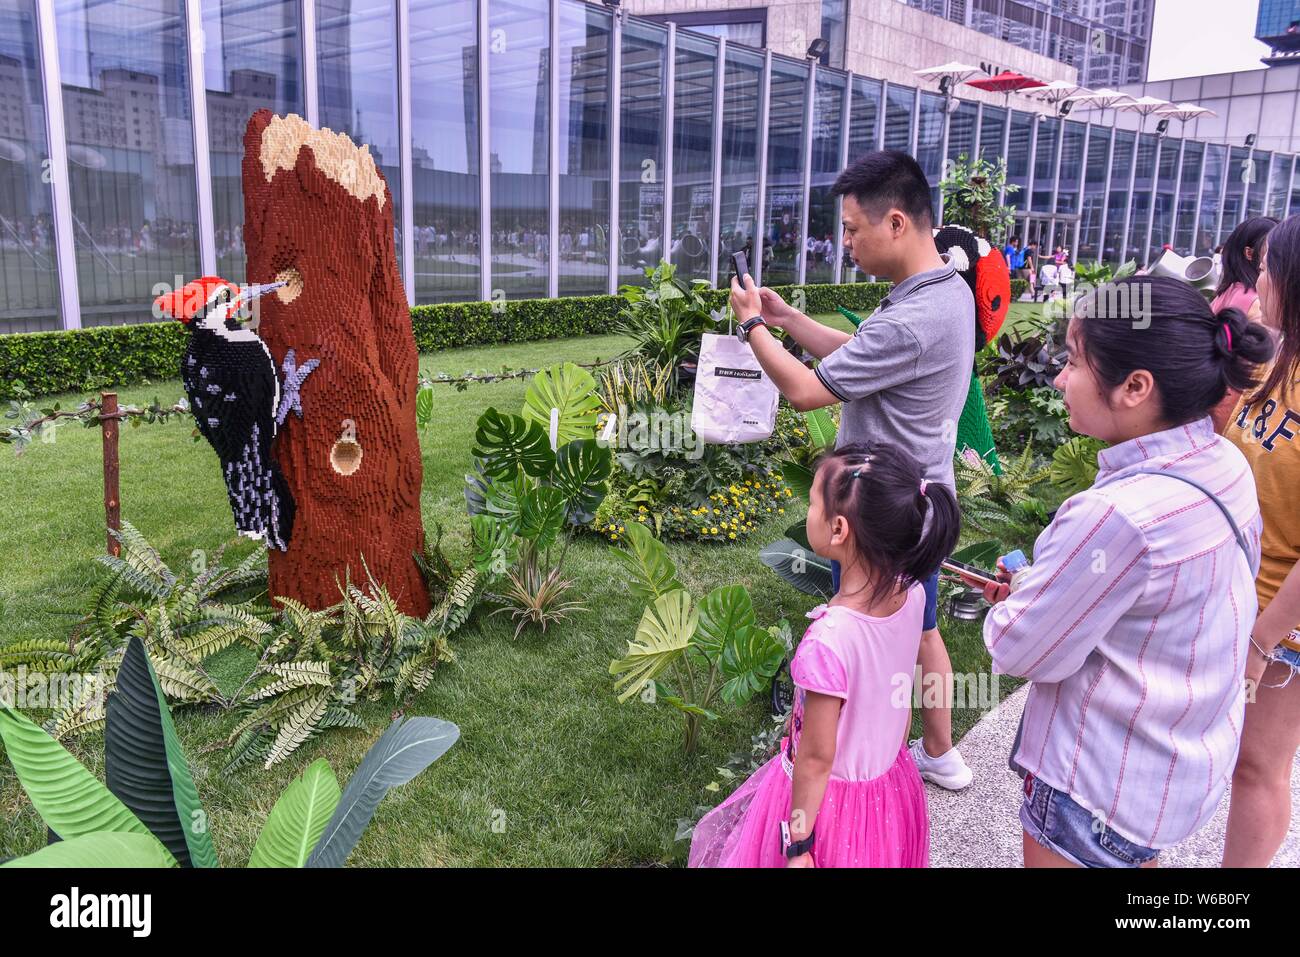 Visitors look at a Lego sculpture of woodpecker created by New York-based artist Sean Kenney during the 'Nature Connects' Lego exhibition at the Cheng Stock Photo